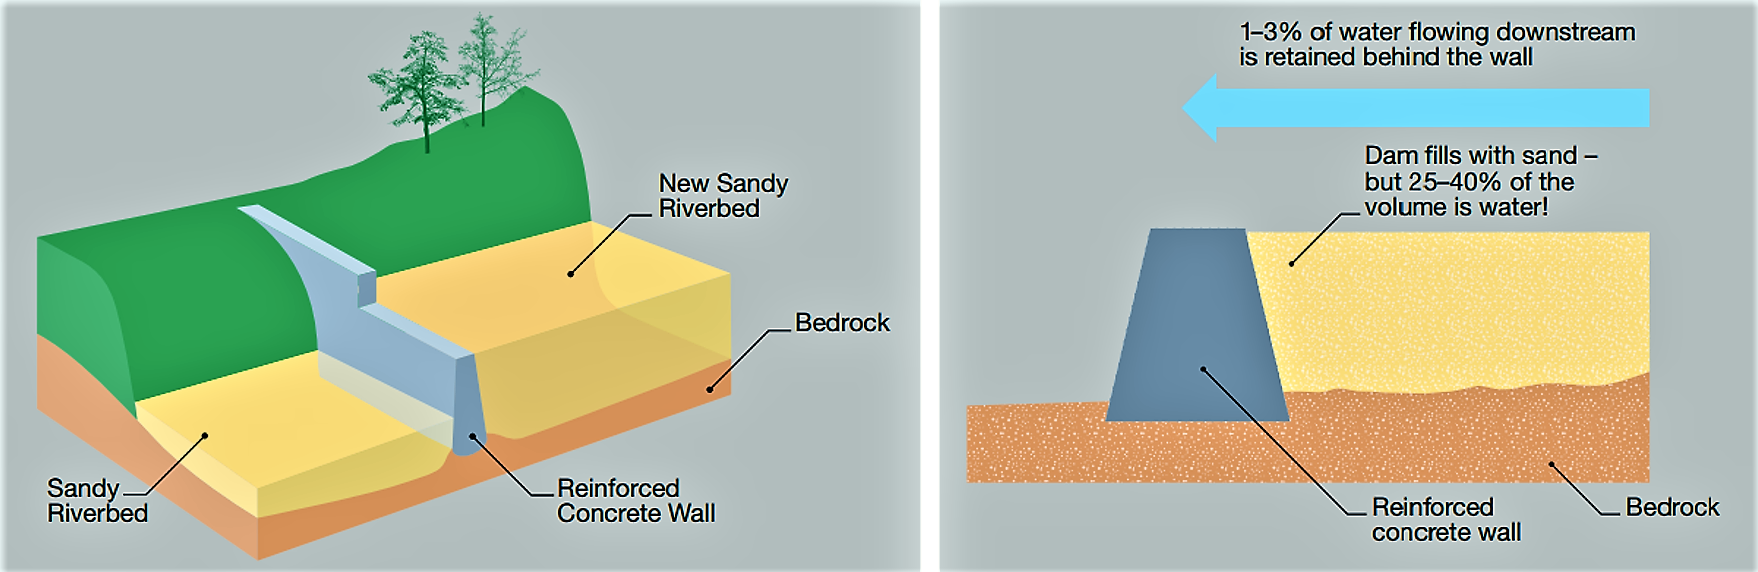 Left: Schematic cross-section of a sand dam. Right: Sand accumulates until the dam is completely full of sand up to the spillway. Water is stored within the sand, protected and filtered, making up to 40 % of the total volume